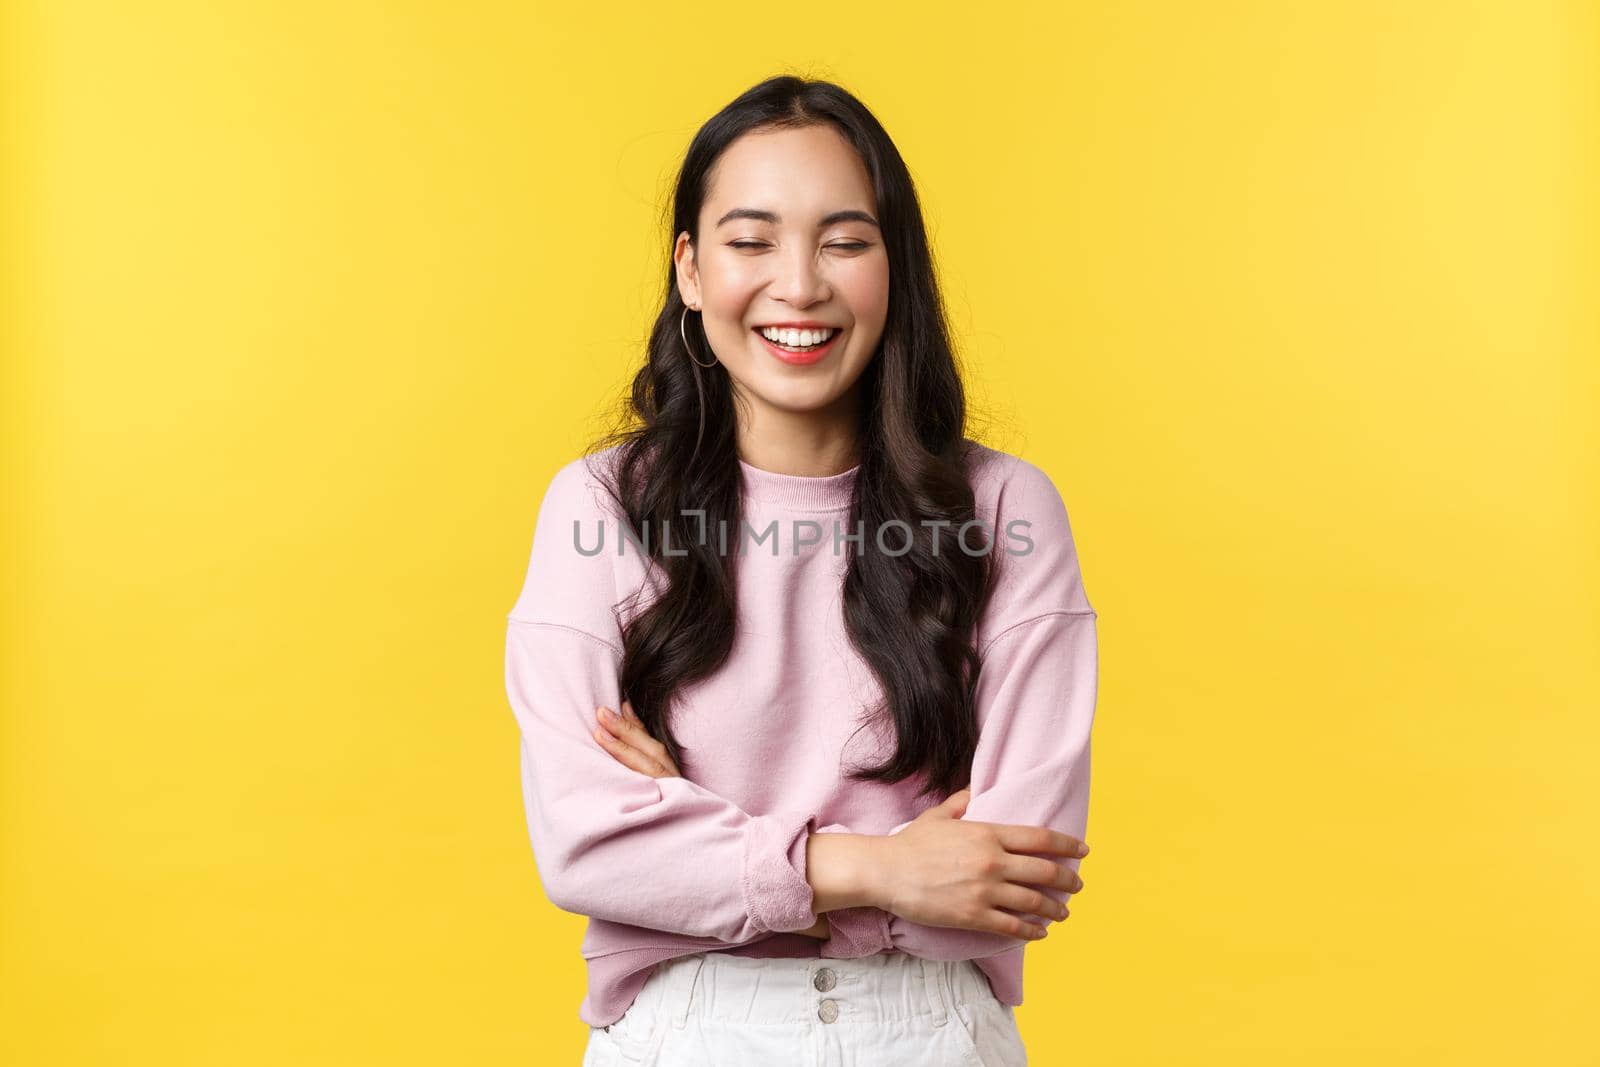 People emotions, lifestyle and fashion concept. Cheerful good-looking korean girl having fun, laughing out loud and feeling happy, standing joyful over yellow background.